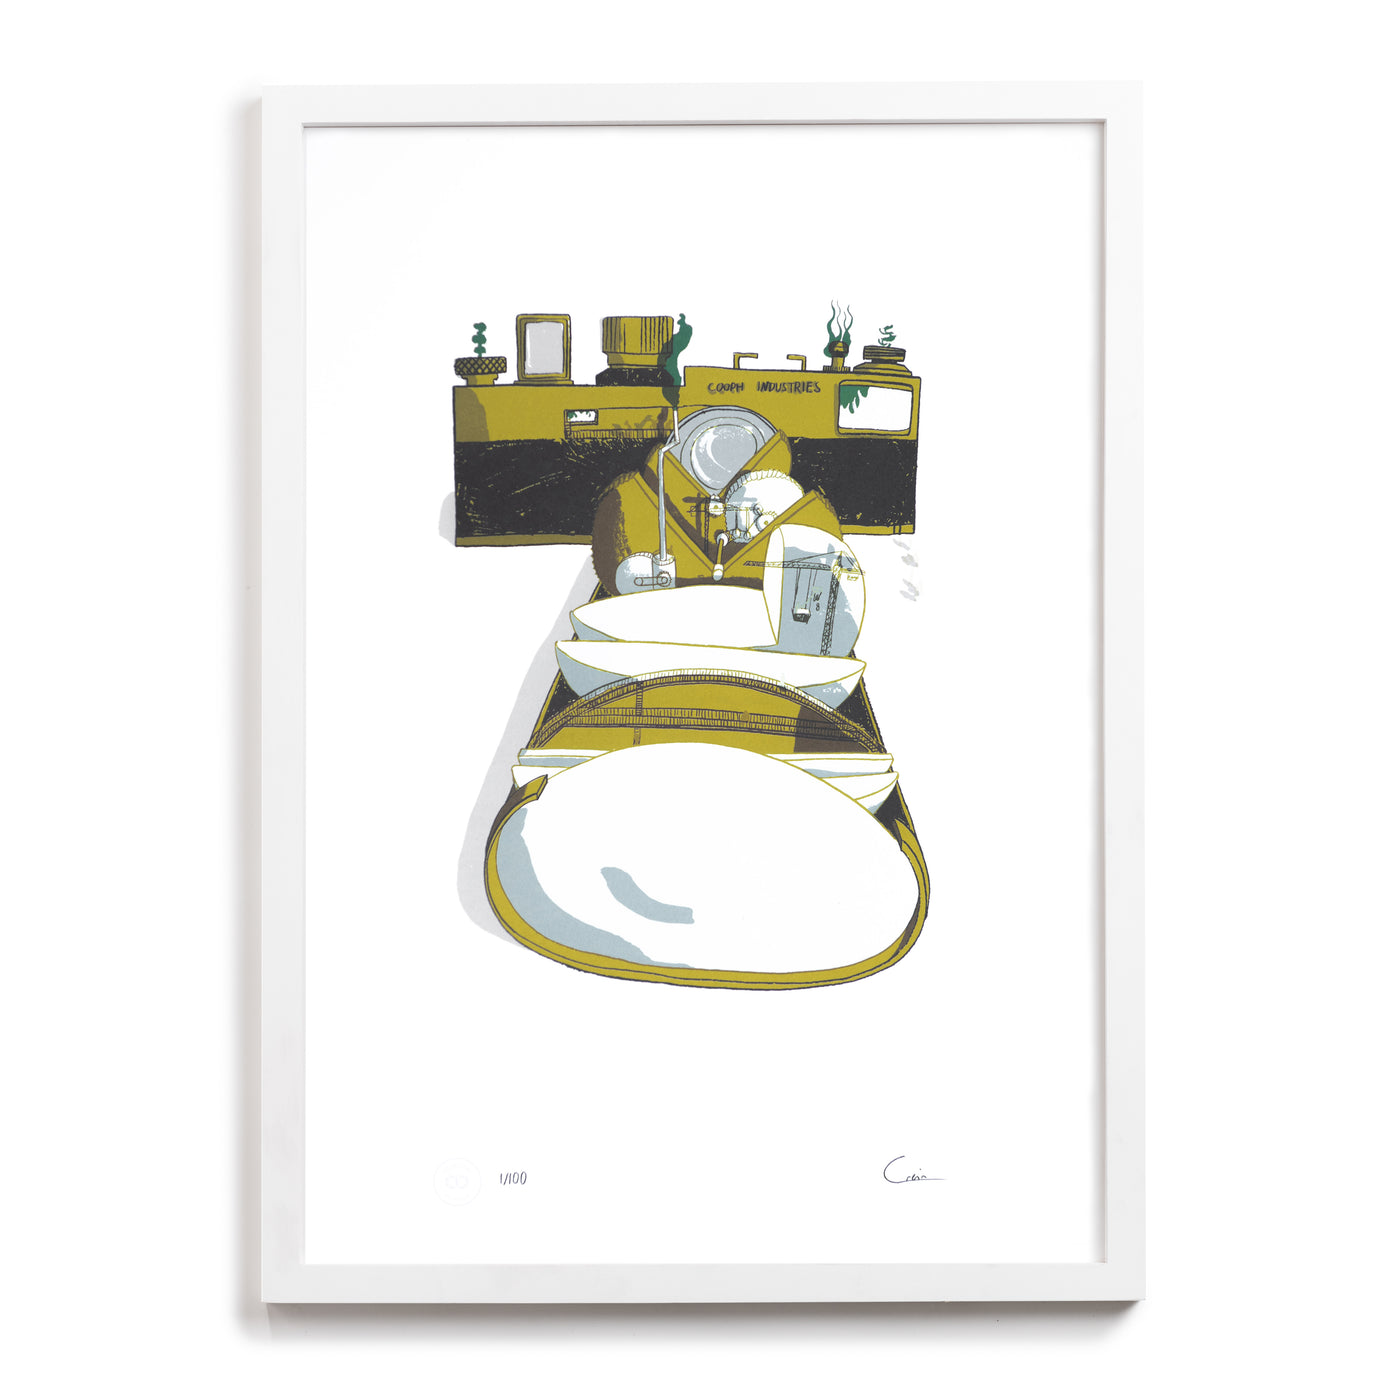 Art Print FACTORY by Julian Grein - Limited Edition